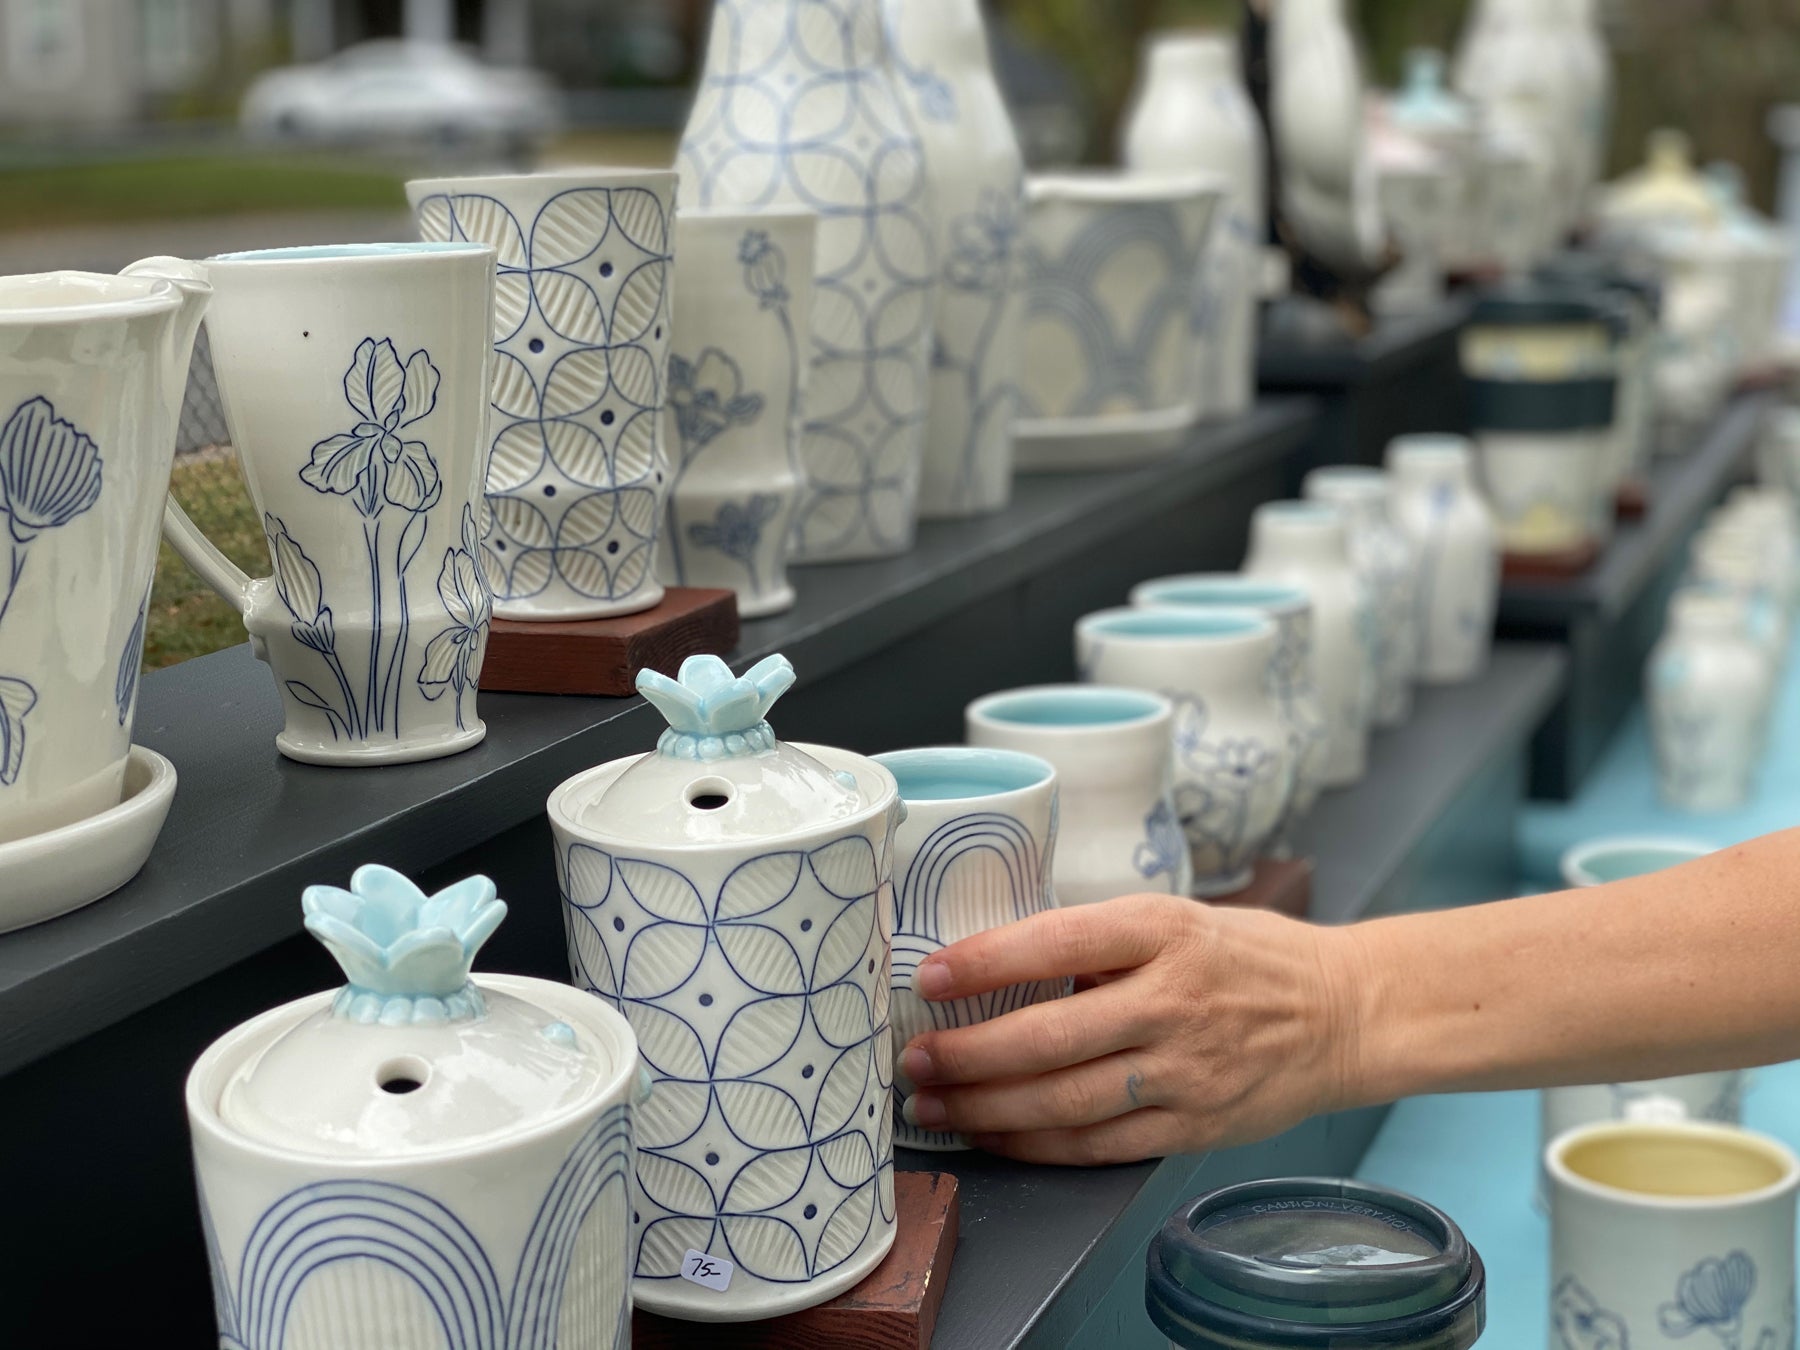 Handmade porcelain pottery pieces by artist Julie Wiggins are lined up on shelves and blue into the distance as a hand reaches to grab a cup in the foreground. 